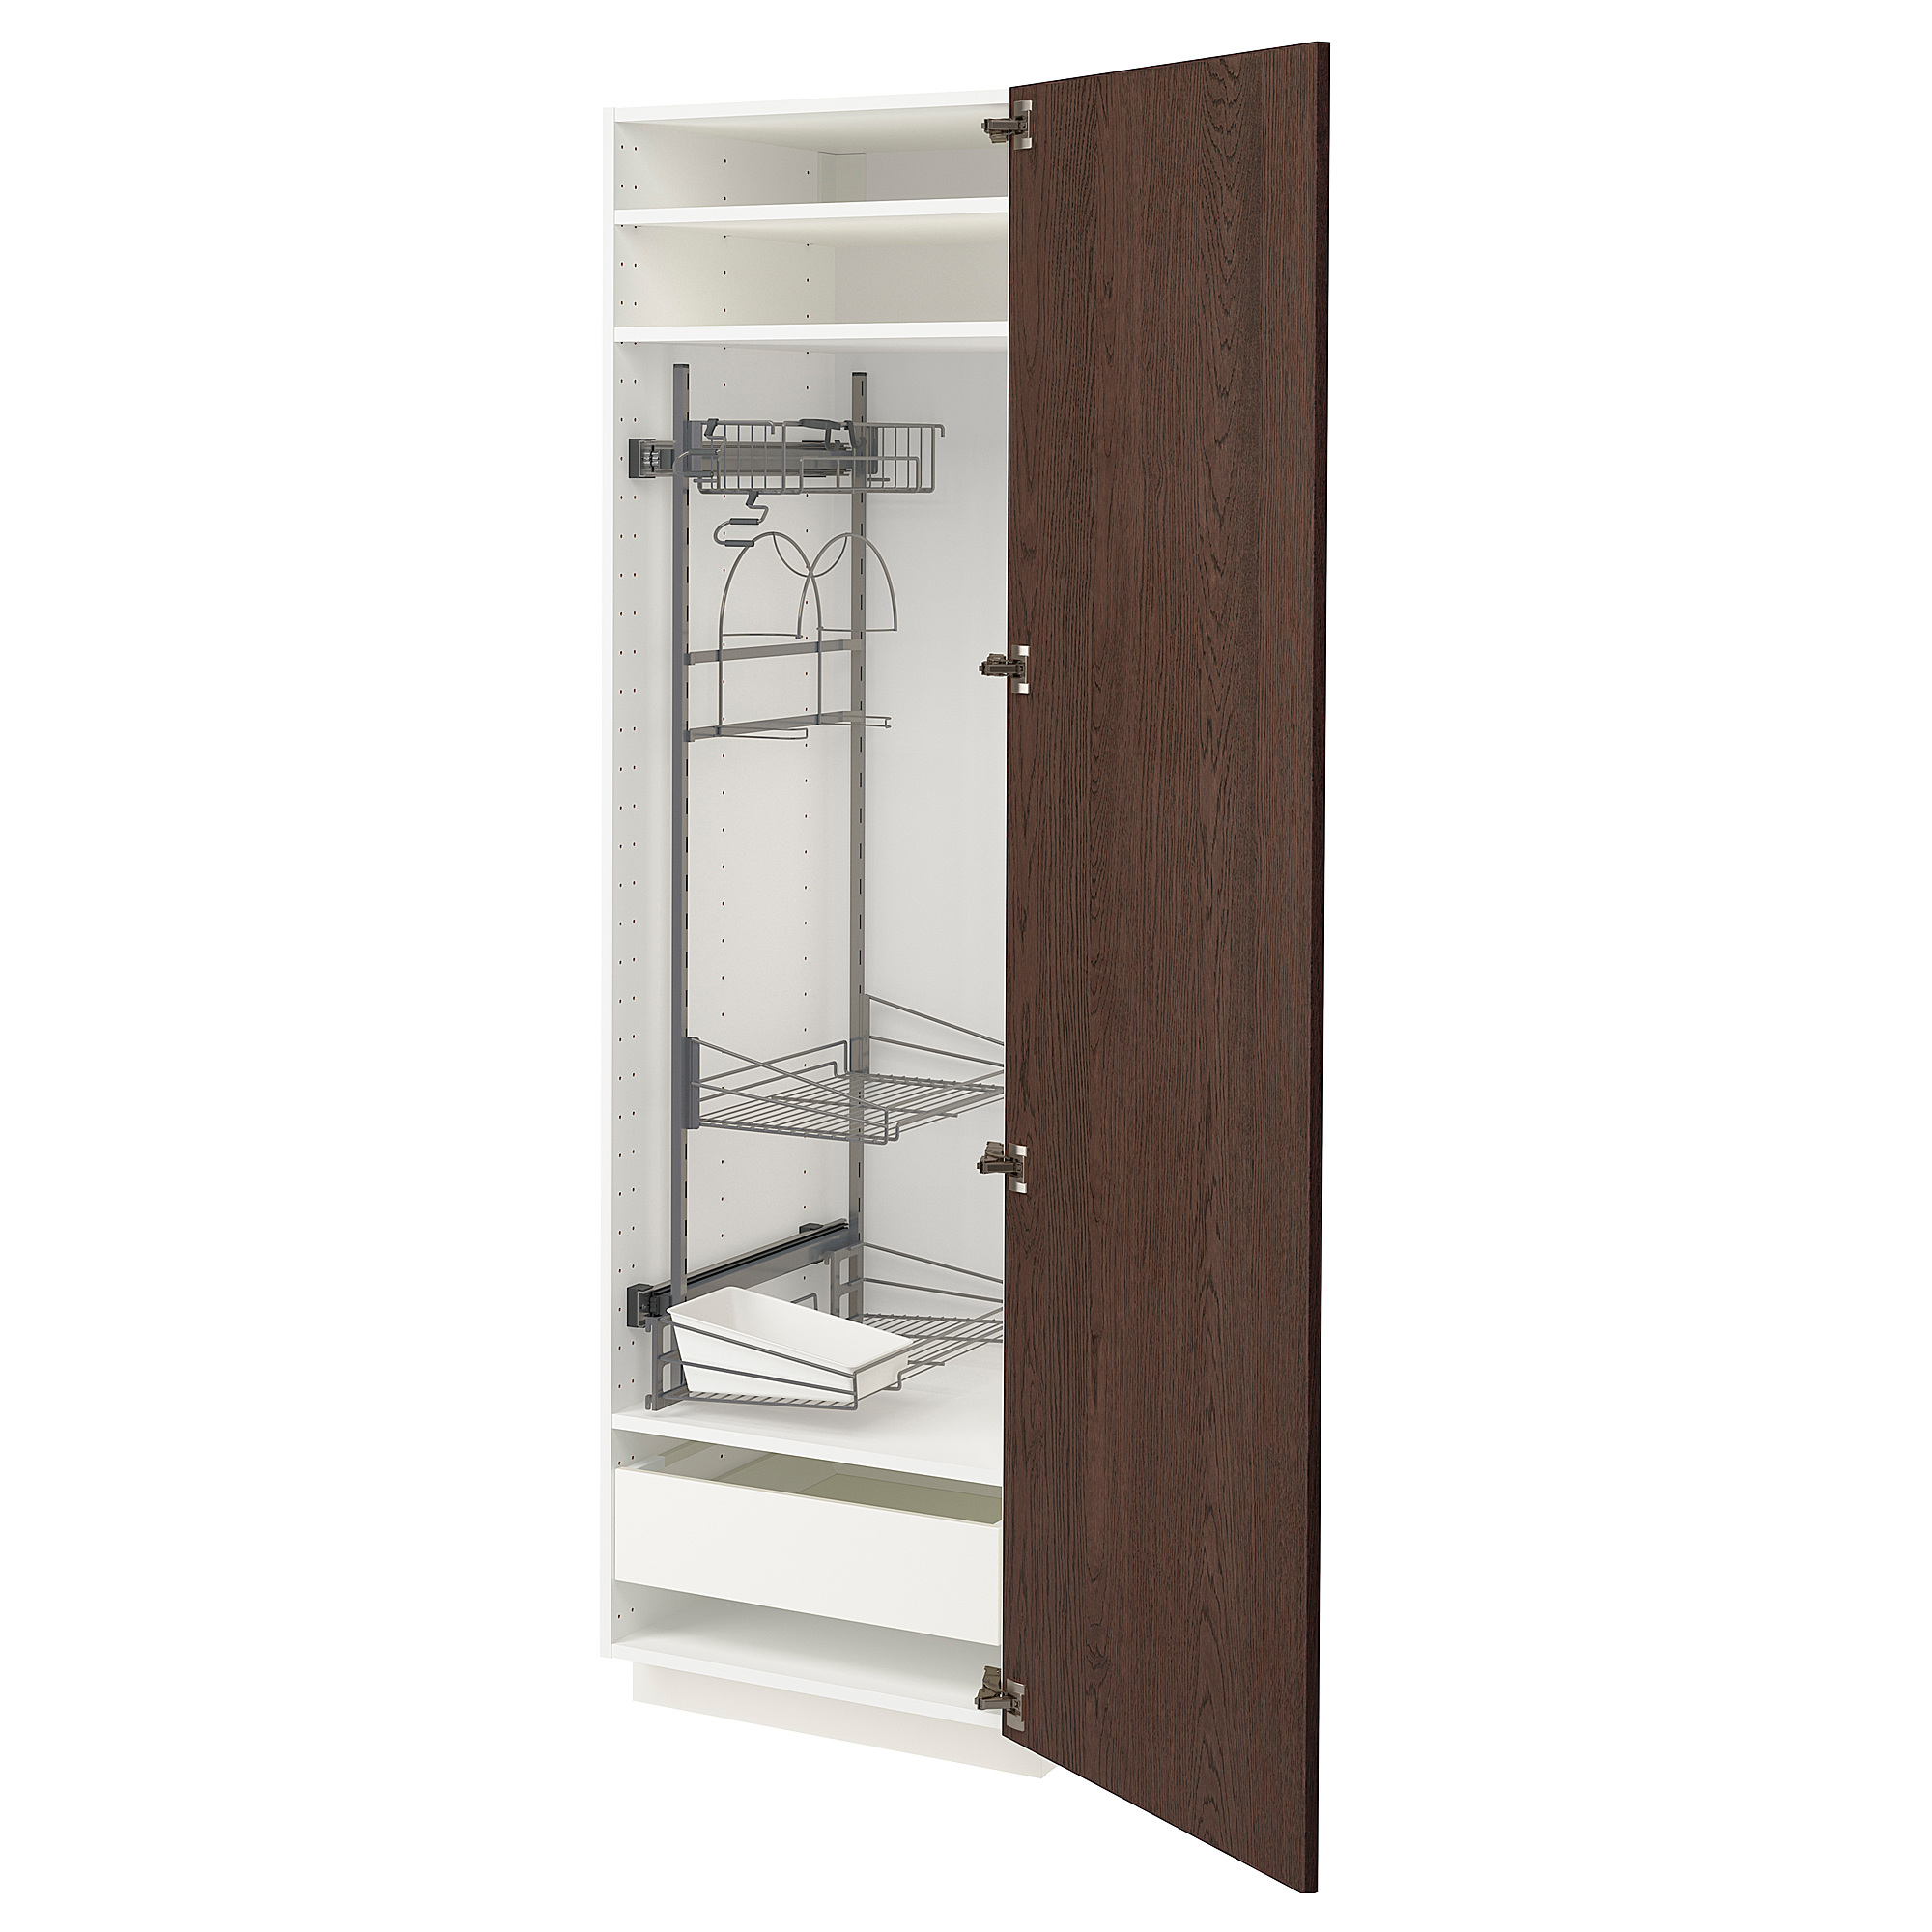 METOD/MAXIMERA high cabinet with cleaning interior